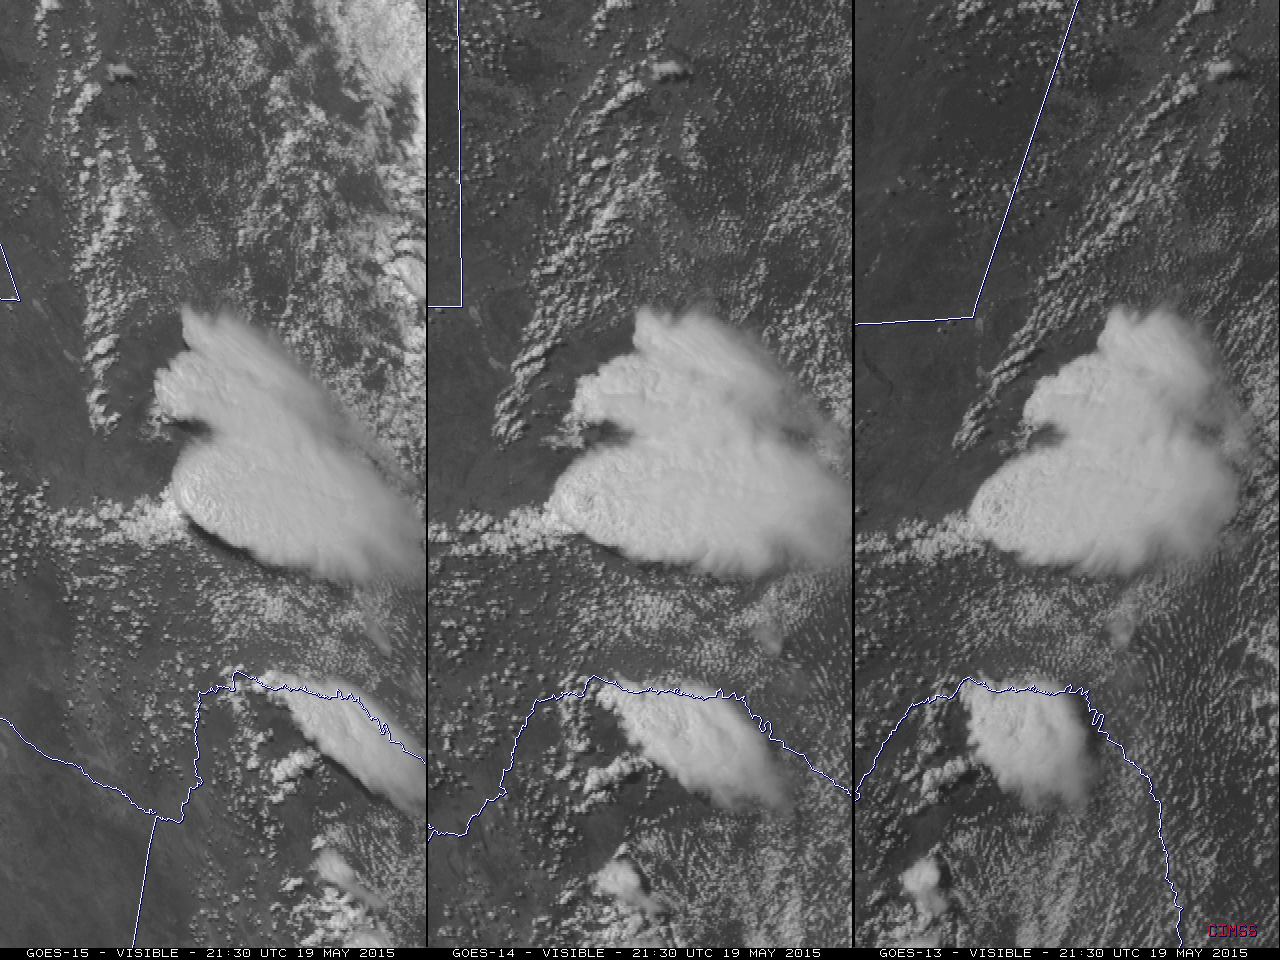 GOES-15 (left), GOES-14 (center), and GOES-13 (right) 0.62 µm visible channel images [click to play animation]